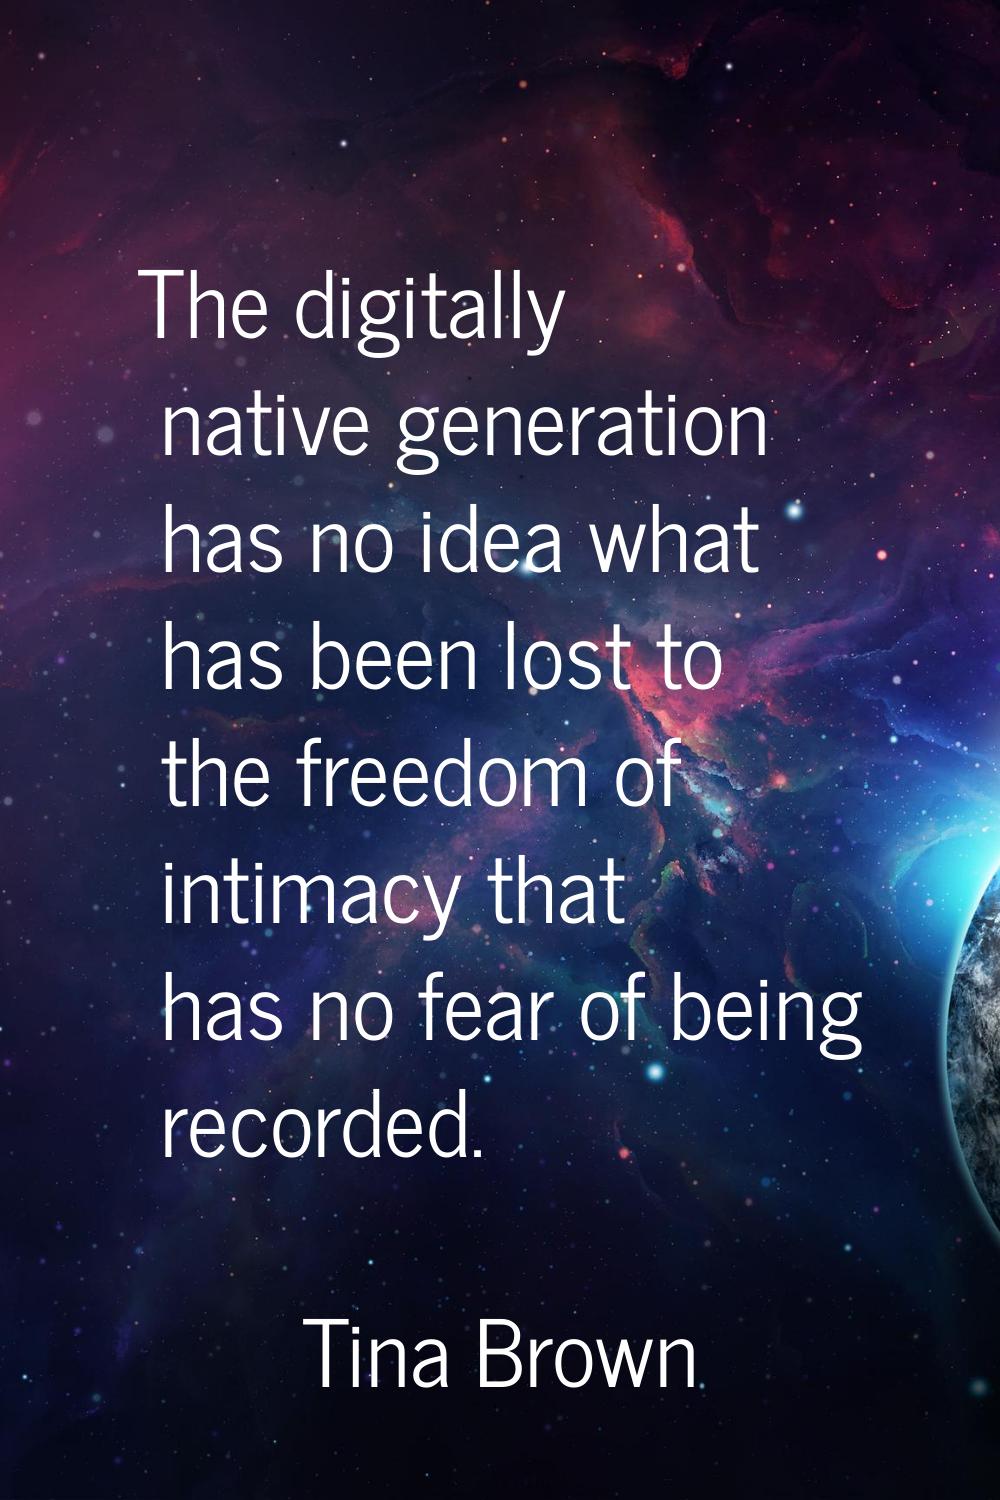 The digitally native generation has no idea what has been lost to the freedom of intimacy that has 